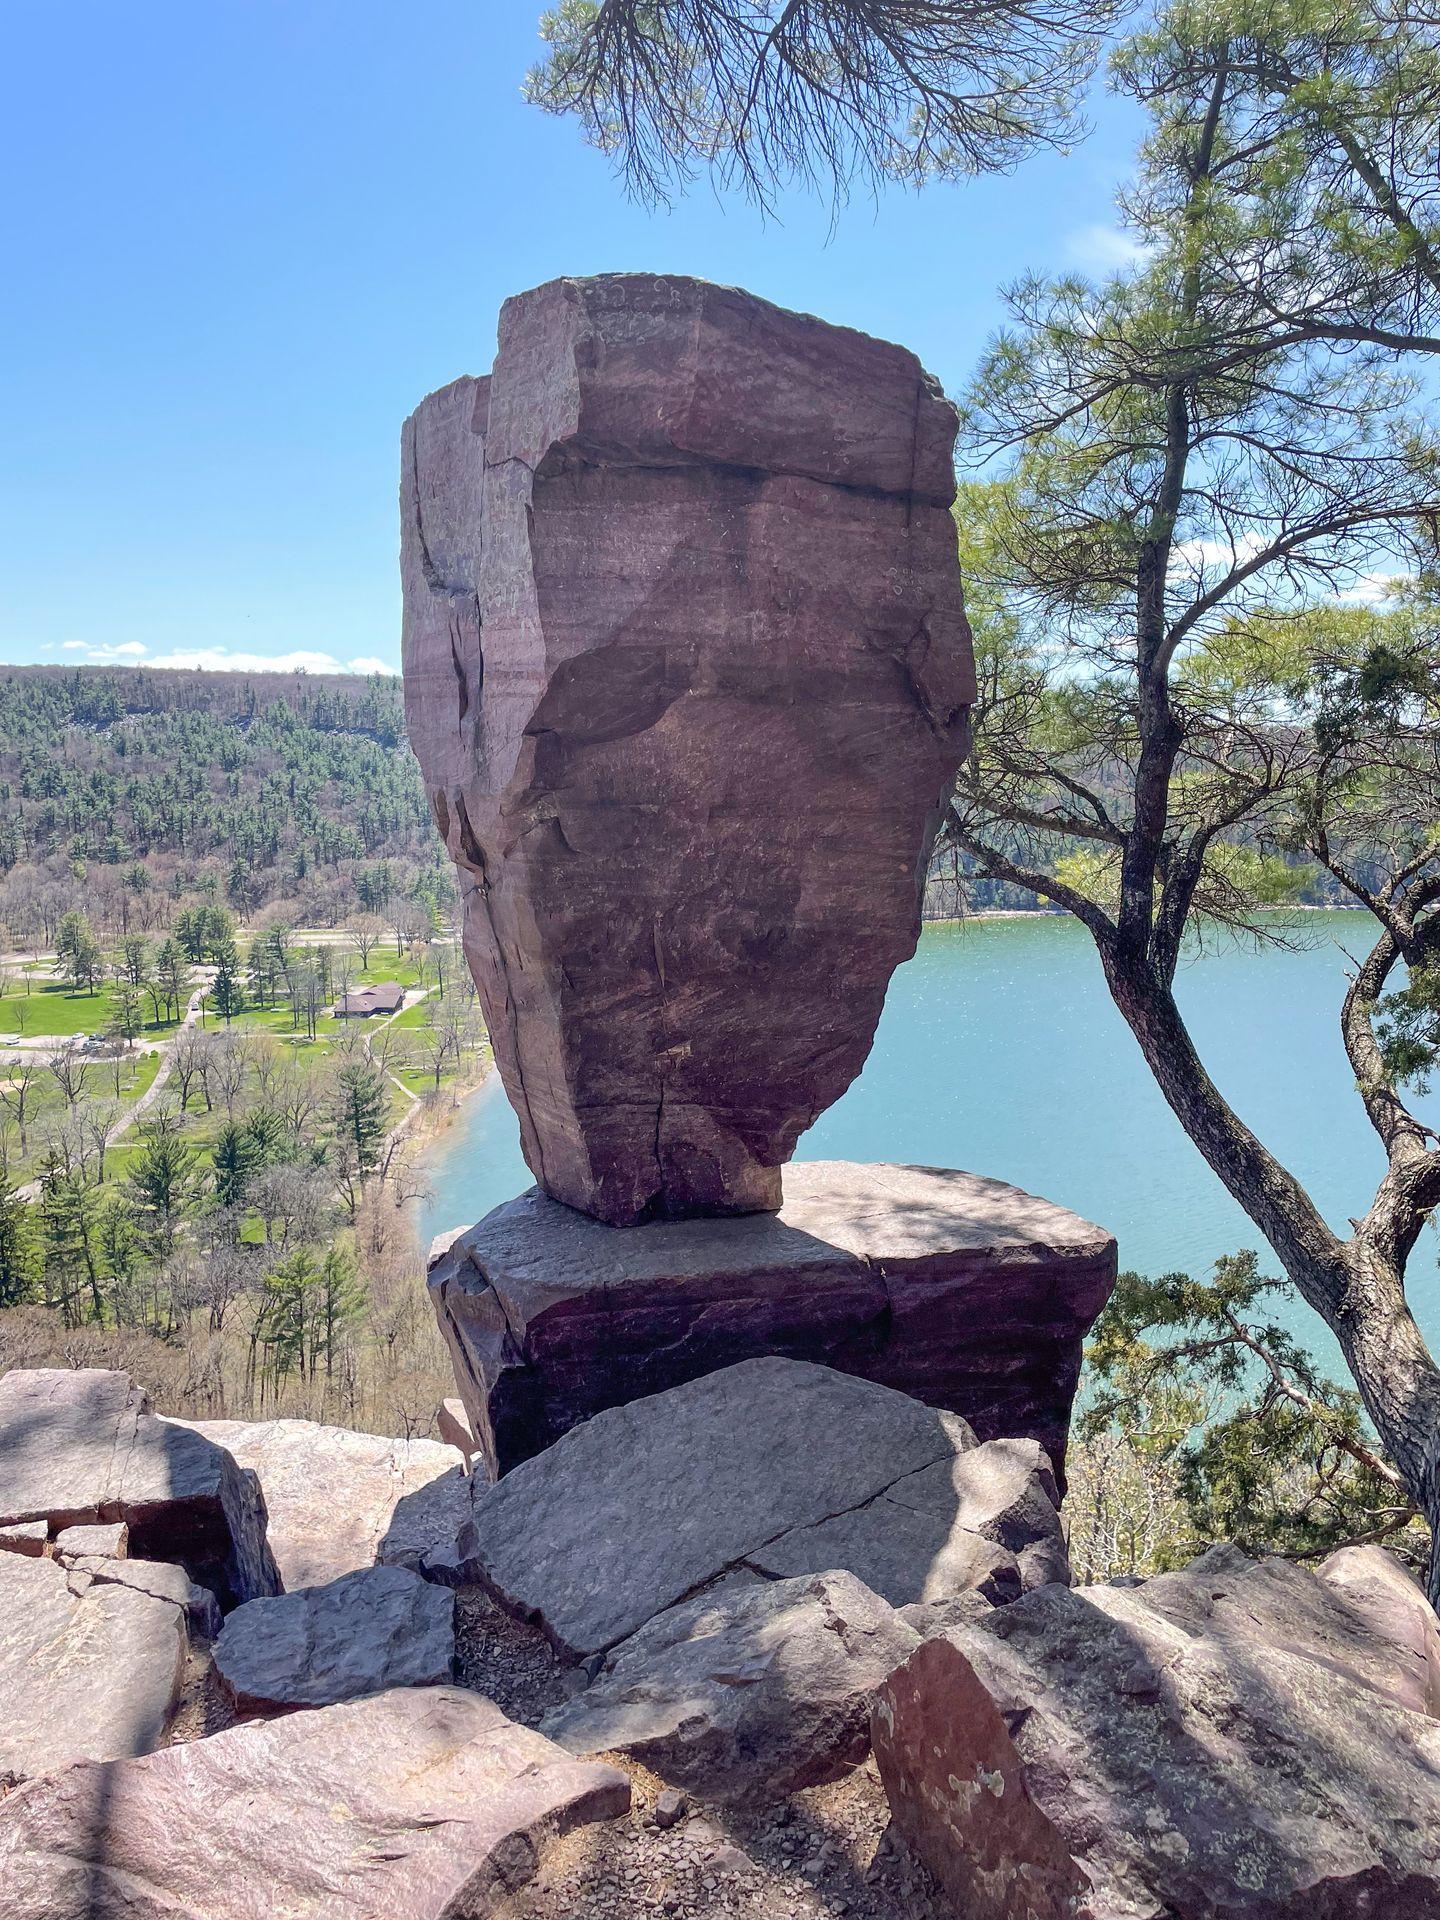 A giant rock that looks as if it's balancing on a narrow section.